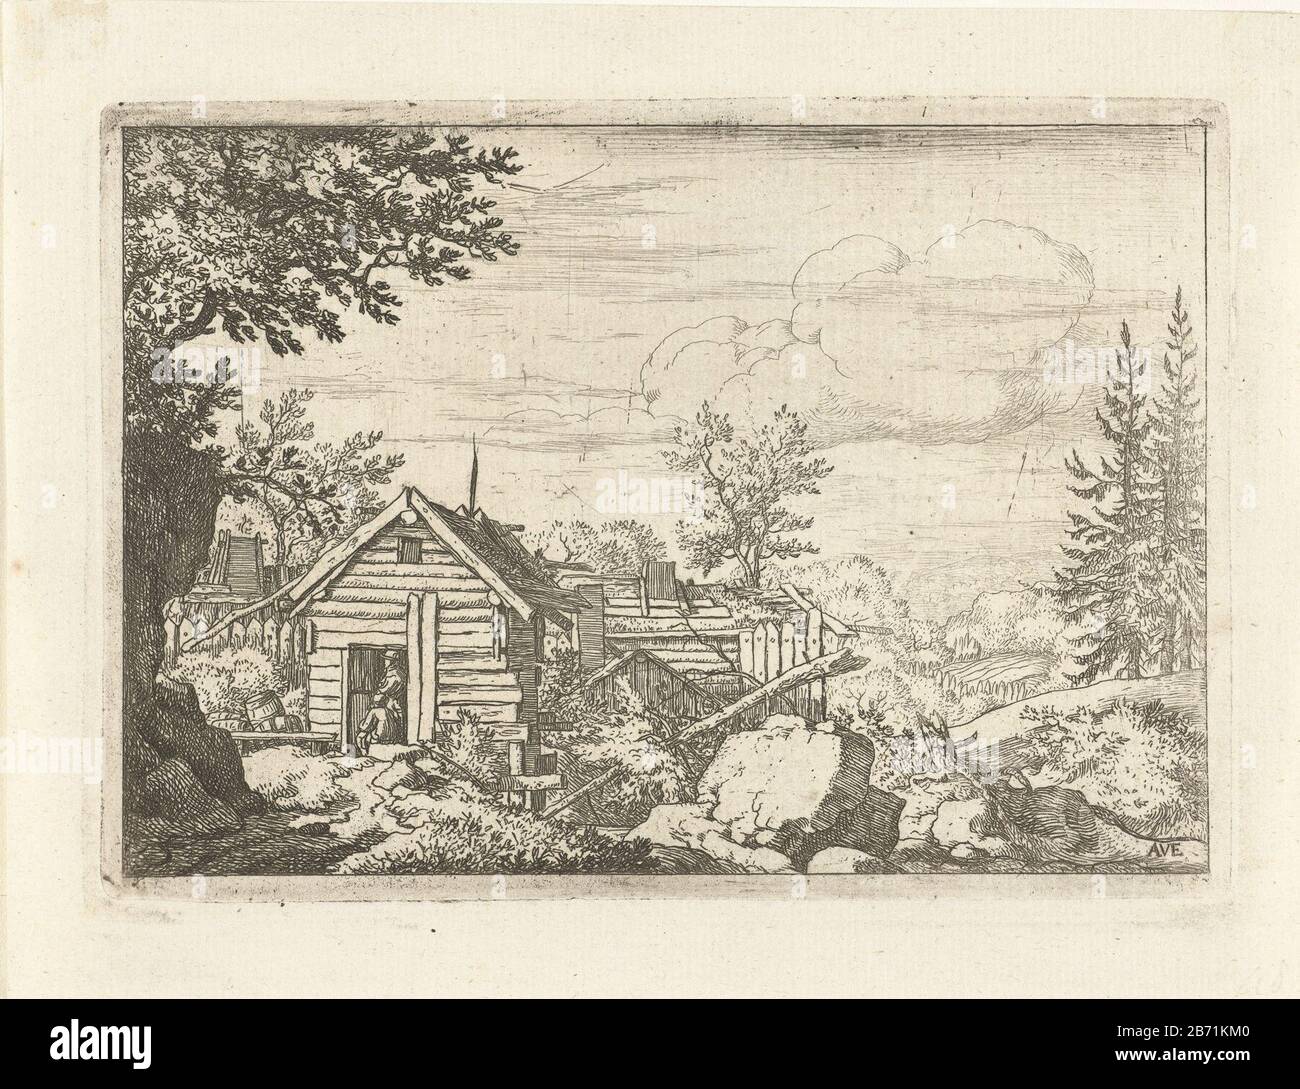 Landschap met twee mannen in de deuropening van een houten hut Landscape with two men in the doorway of a wooden hut Object Type : picture Item number: RP-P-OB-50.352Catalogusreferentie: Hollstein Dutch 48-2 (3) Manufacture Creator: printmaker: Allaert van Everdingen (listed on object ) Place manufacture: The Netherlands Date: 1631 - 1675 Physical characteristics: etching material: paper Technique: etching dimensions: plate edge: h 101 mm × W 143 mm Subject: solitary farm or house in landscape Stock Photo